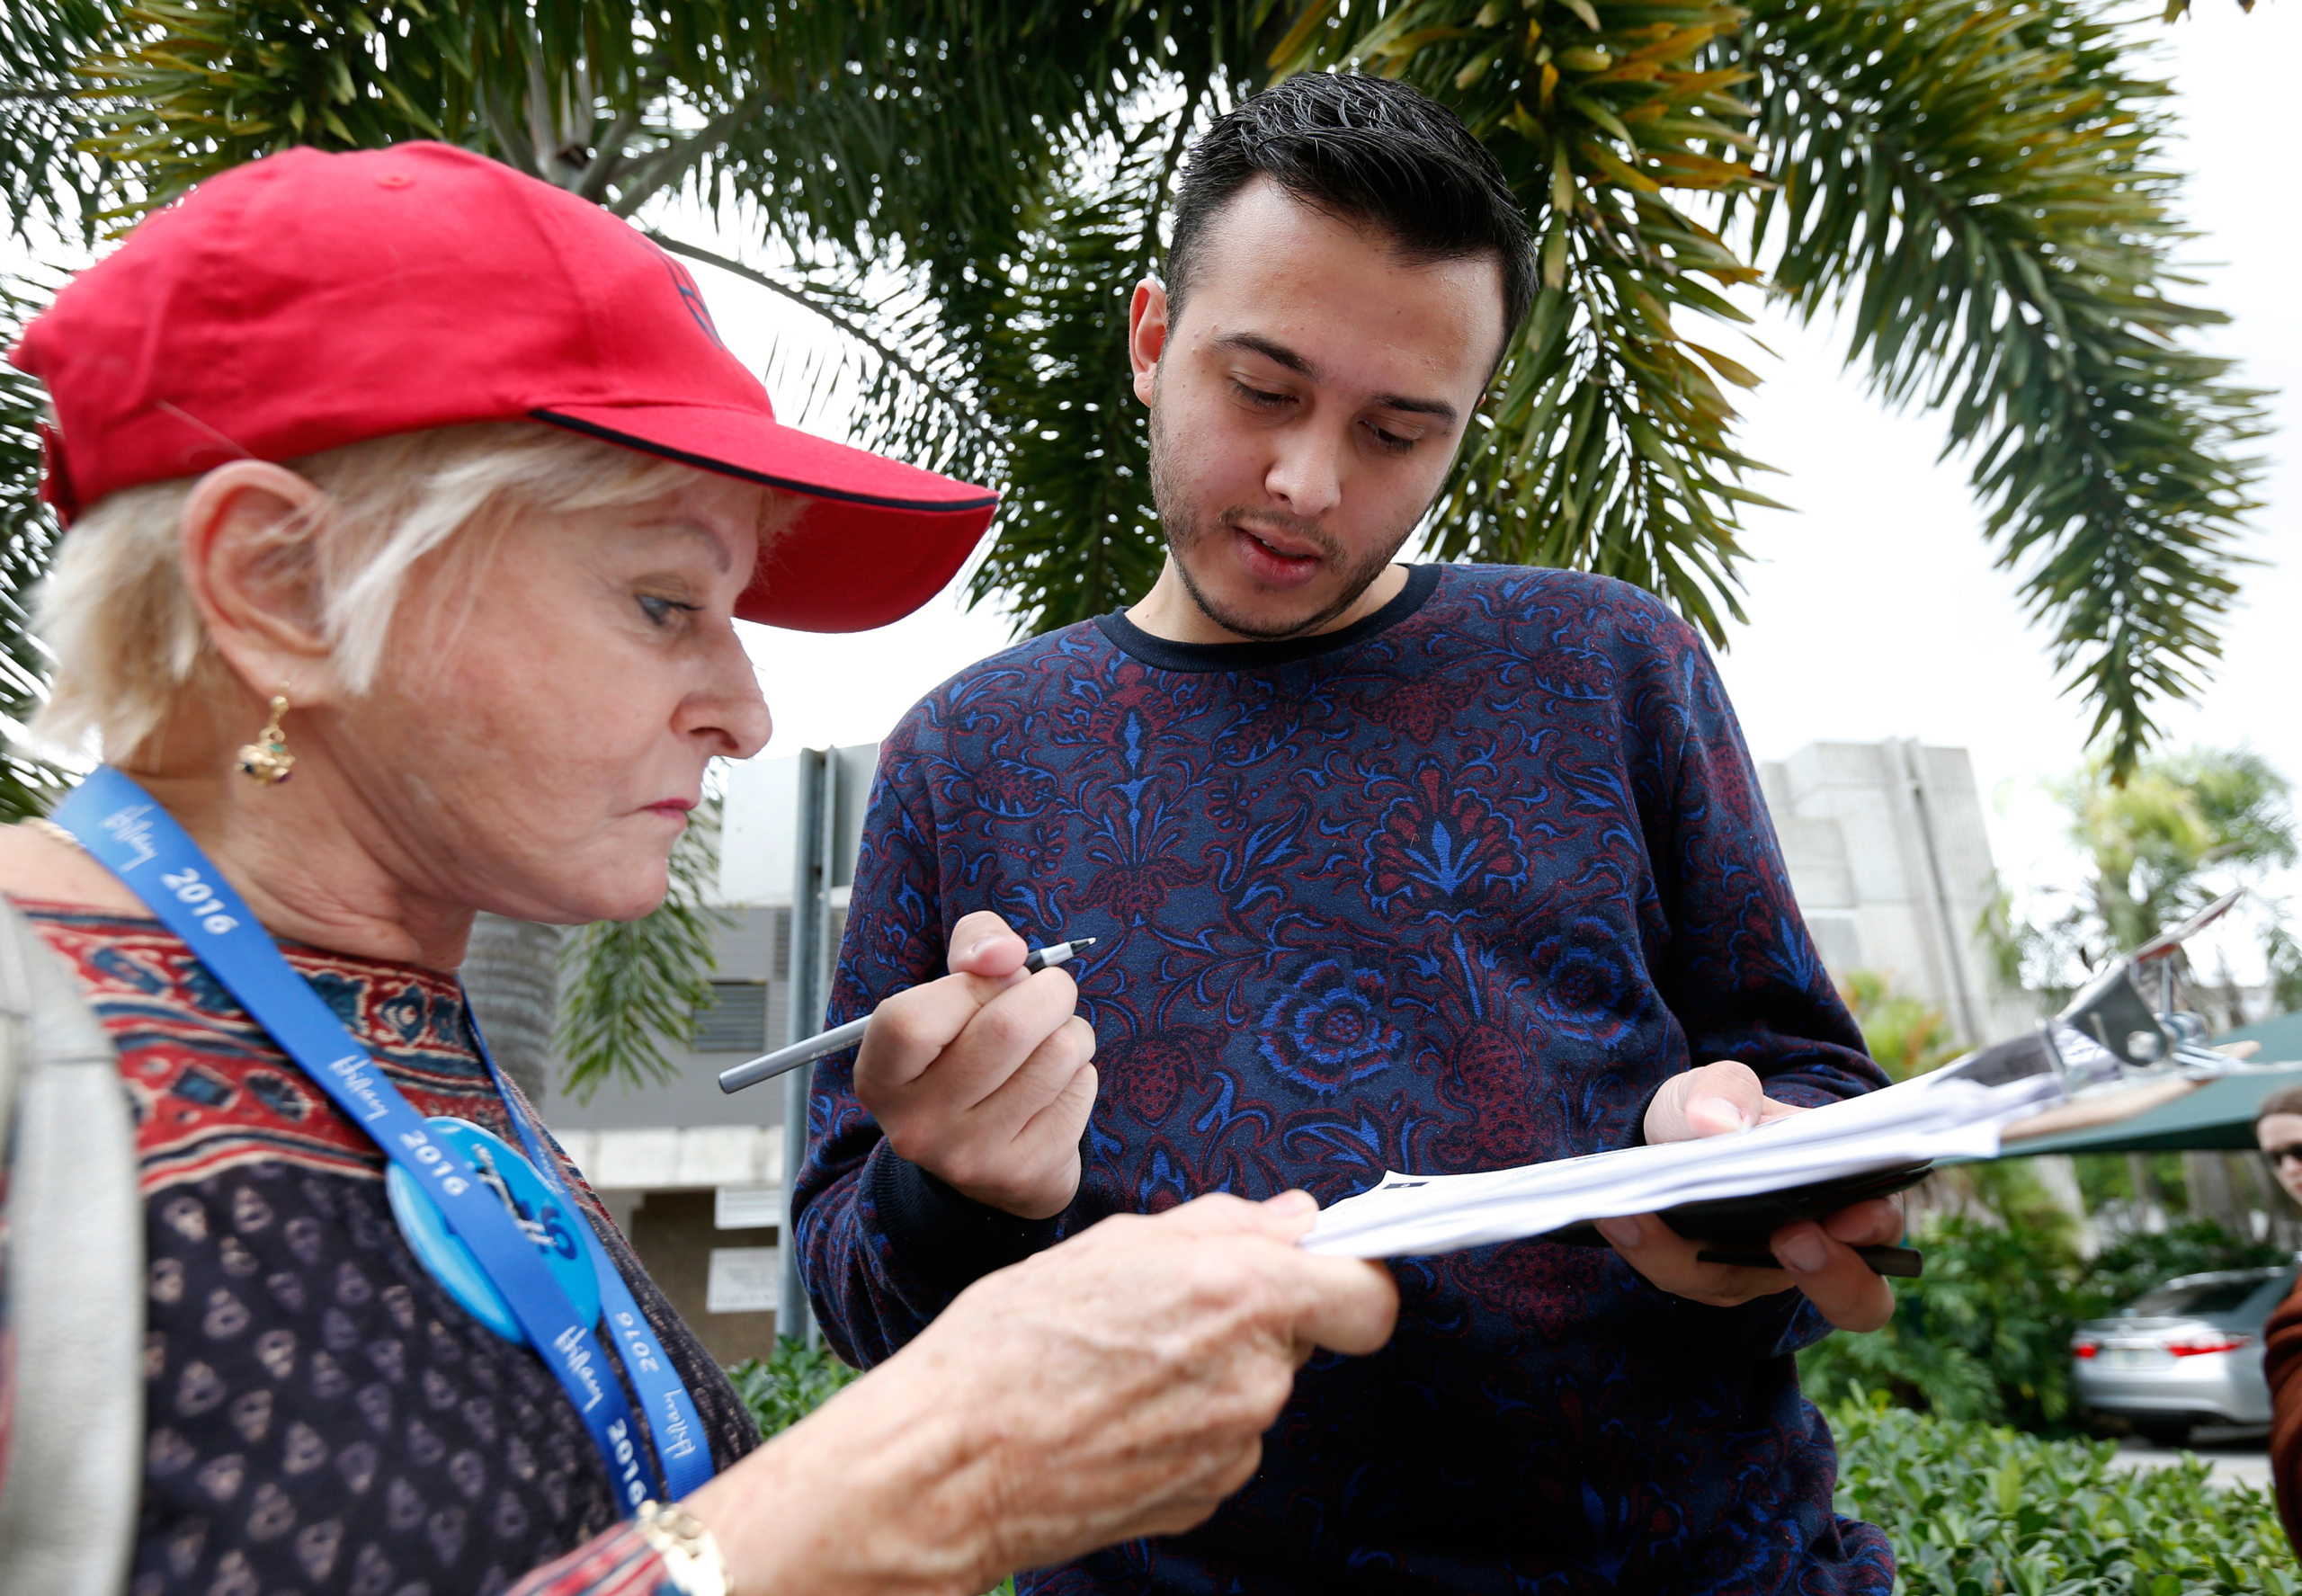 Volunteer Sandi Strickland, left, helps Roman Rodriguez fill out a new voter registration form in Miami on Oct. 11, 2016. (Wilfredo Lee—AP)